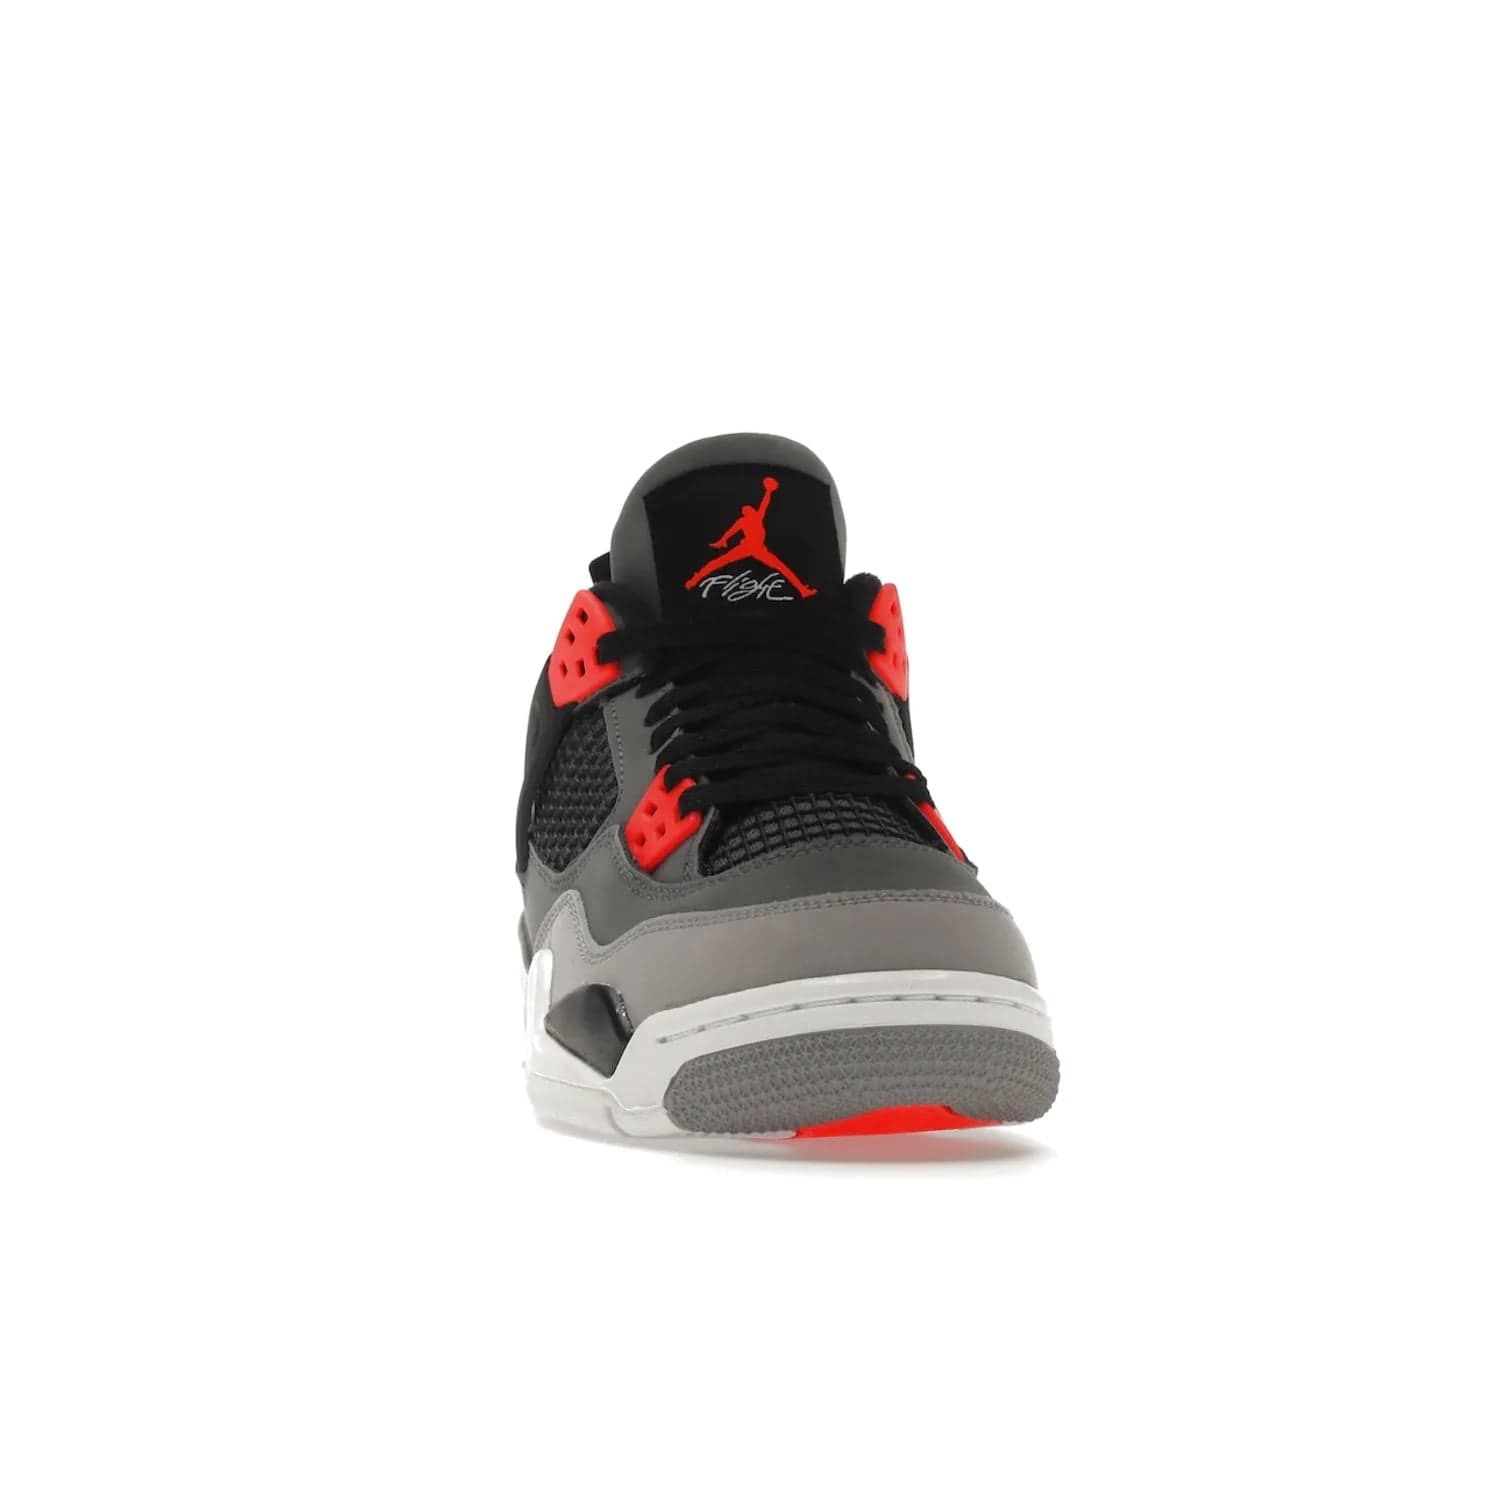 Jordan 4 Retro Infrared (GS) - Image 9 - Only at www.BallersClubKickz.com - Shop the Air Jordan 4 Retro Infrared (GS) for a classic silhouette with subtle yet bold features. Dark grey nubuck upper with lighter forefoot overlay, black accents, Infrared molded eyelets & woven tongue tag. Available June 2022.